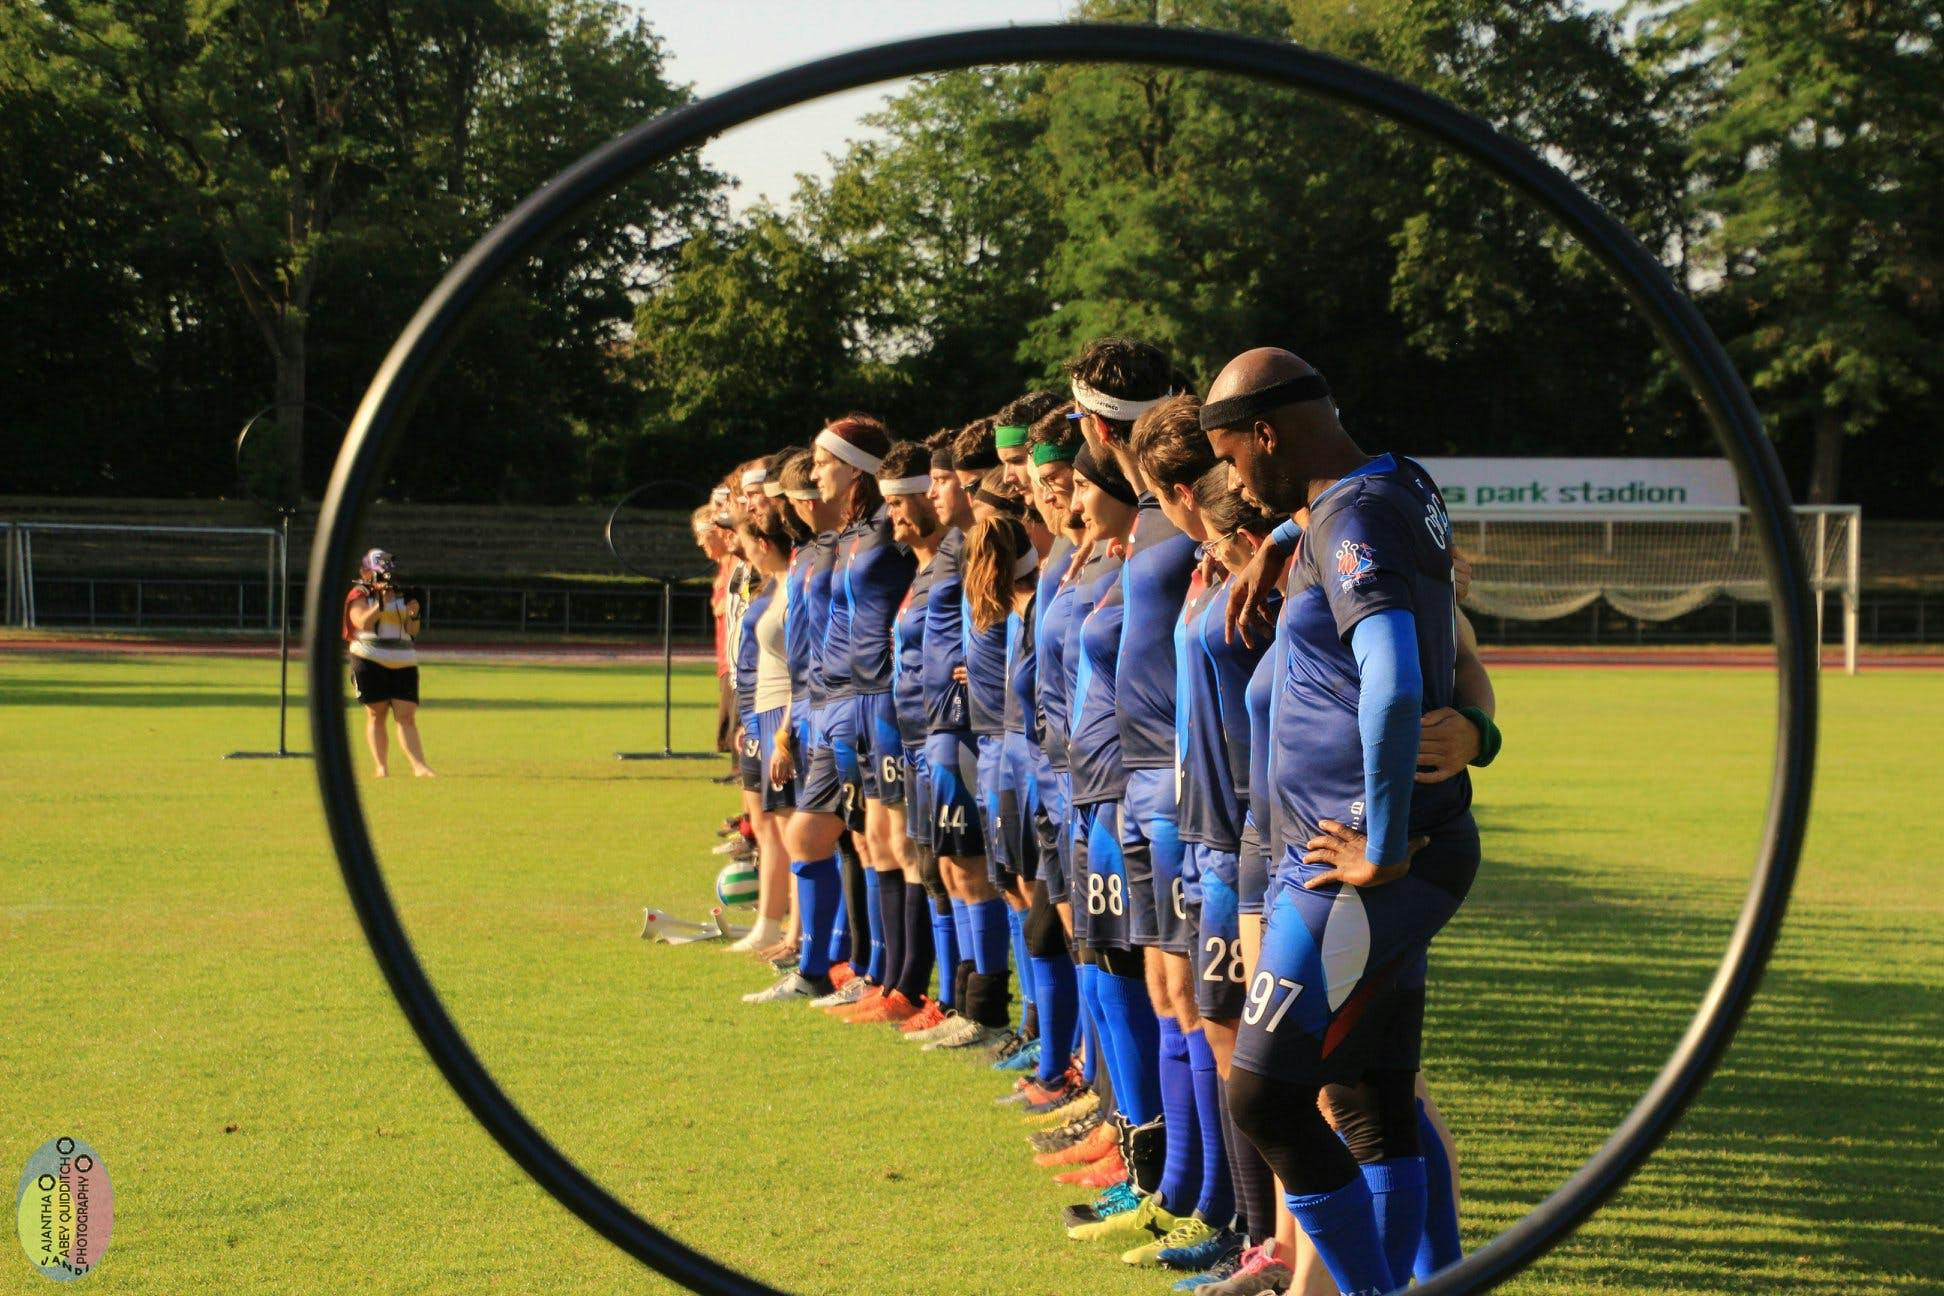 Team France lined up, photo through hoop